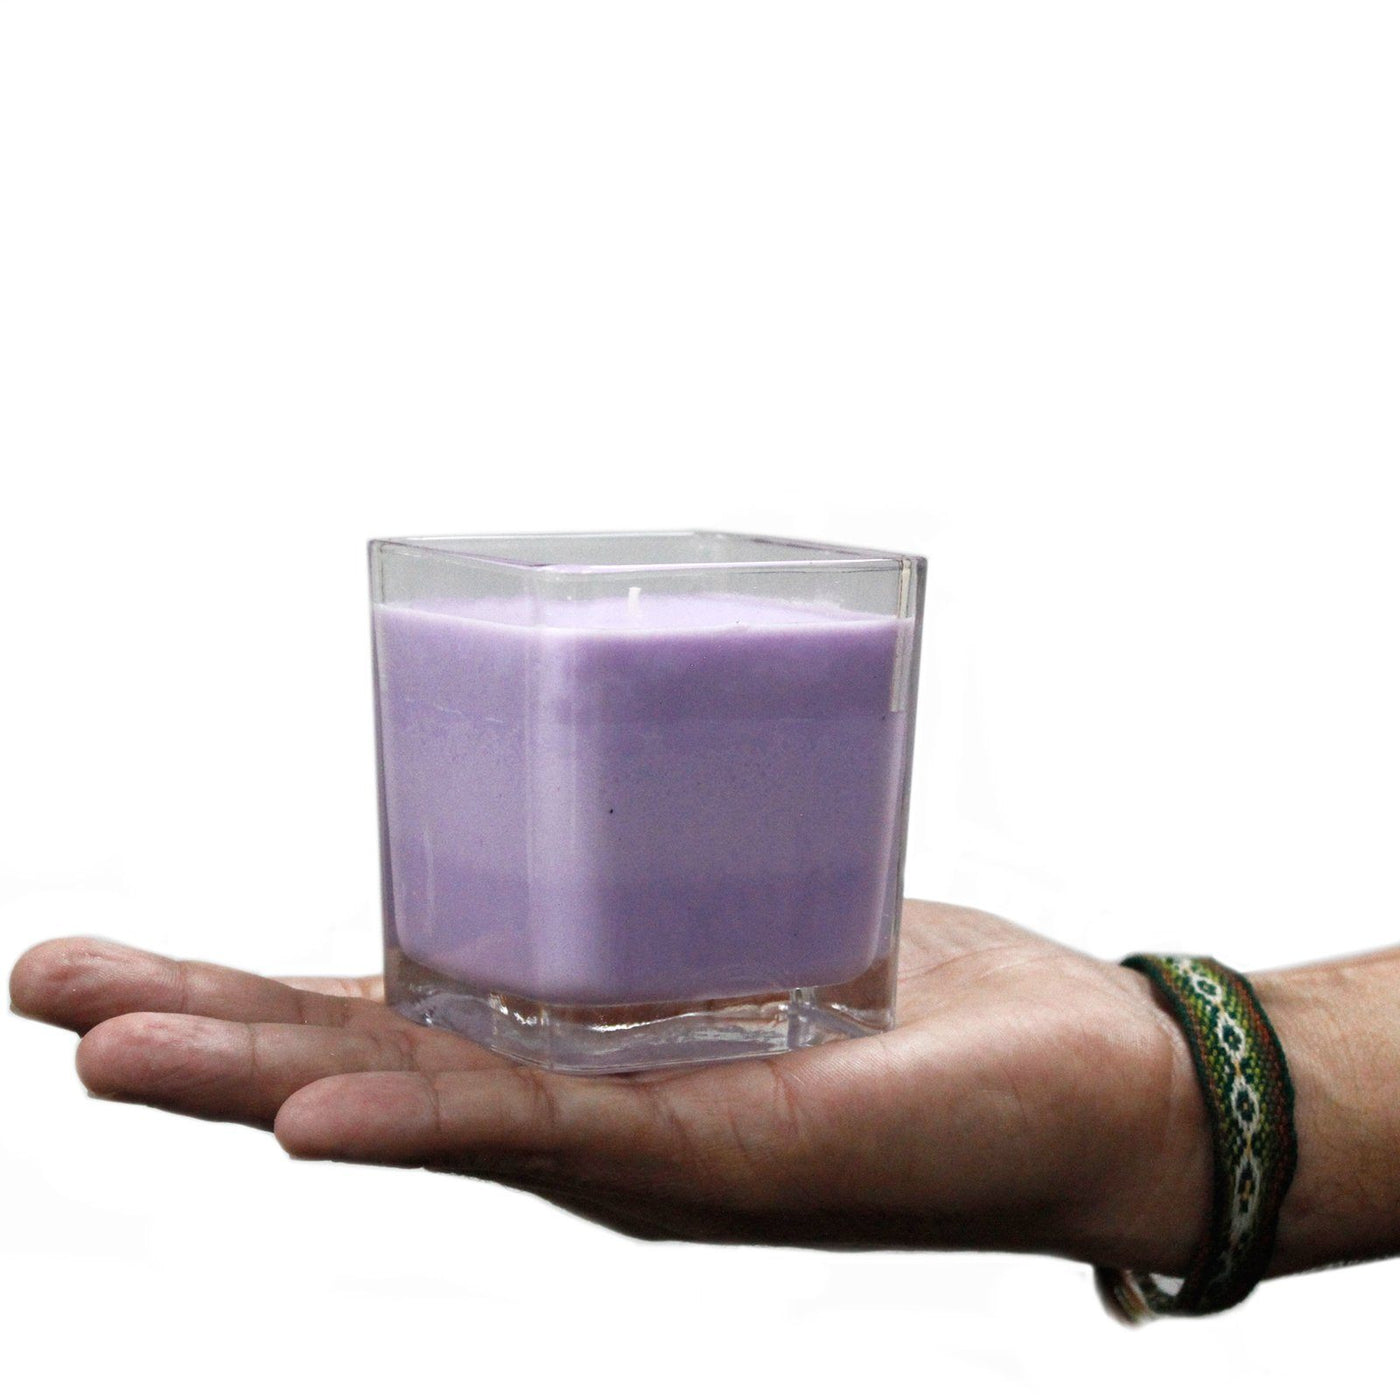 Soy Wax Scented Glass Jar Candle - Fig & Cassis. These beautiful candles are made with pure soy wax and high-quality fragrance oils. Soy wax candles are a great eco-friendly alternative to paraffin candles. Soy candles burn evenly, so you won’t have any wax left on the sides of the jar. They disperse the fragrance beautifully and are better for the planet. Soy candles also burn 30-50% longer and do not contain the toxins that paraffin candles have. What’s not to love?